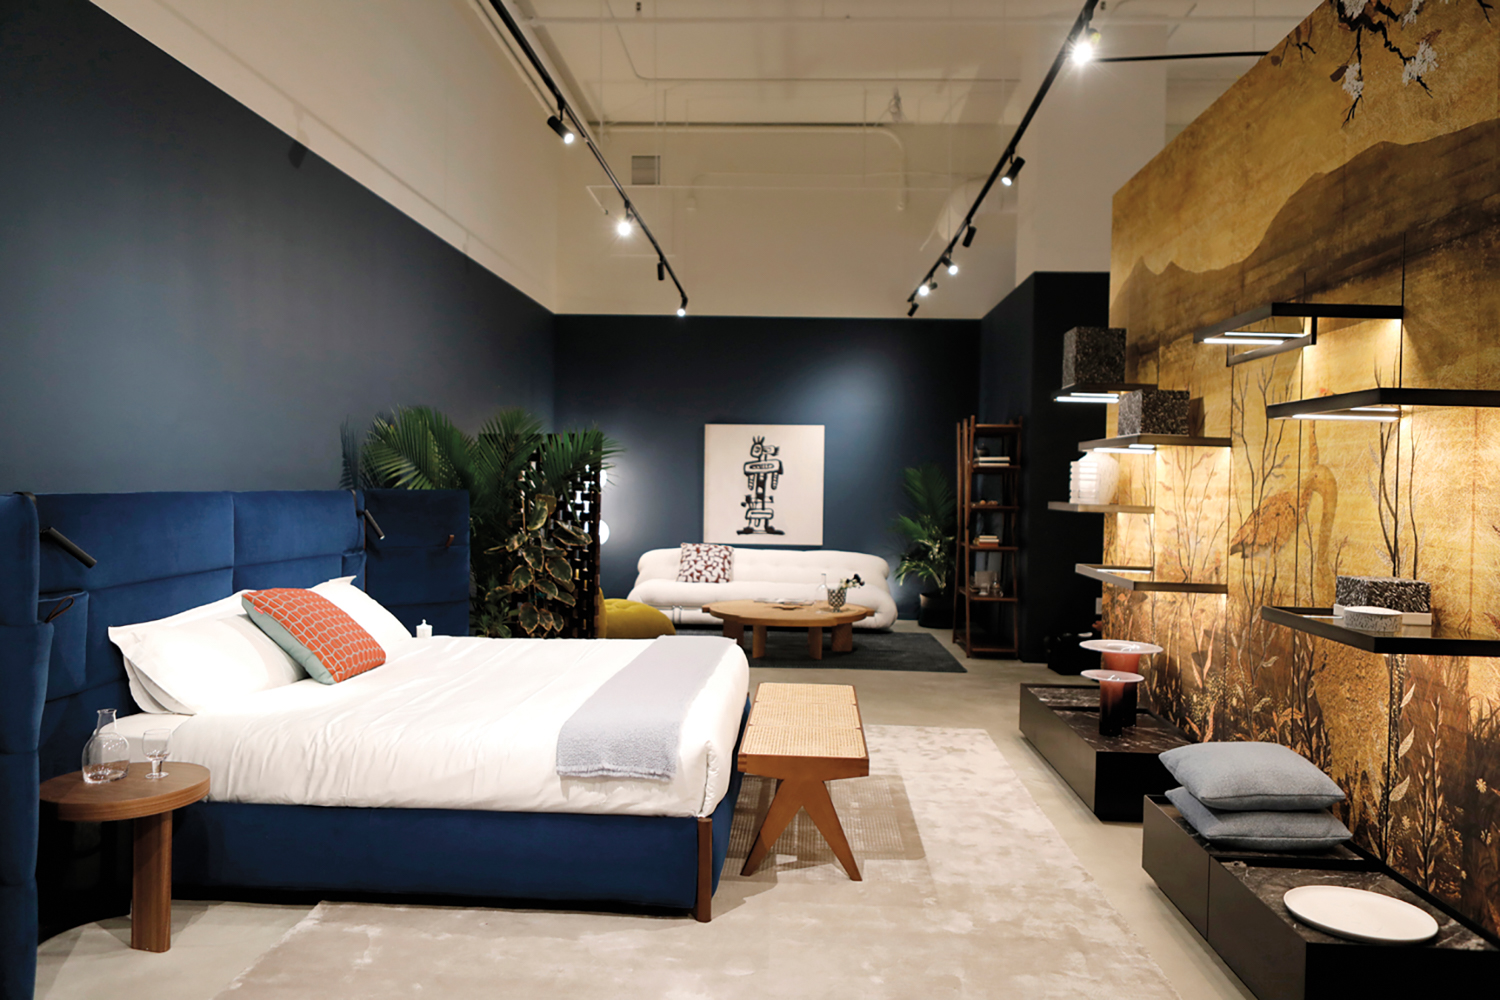 Showroom with blue upholstered bed, wood bench and side table, and white sofa beneath and black-and-white artwork